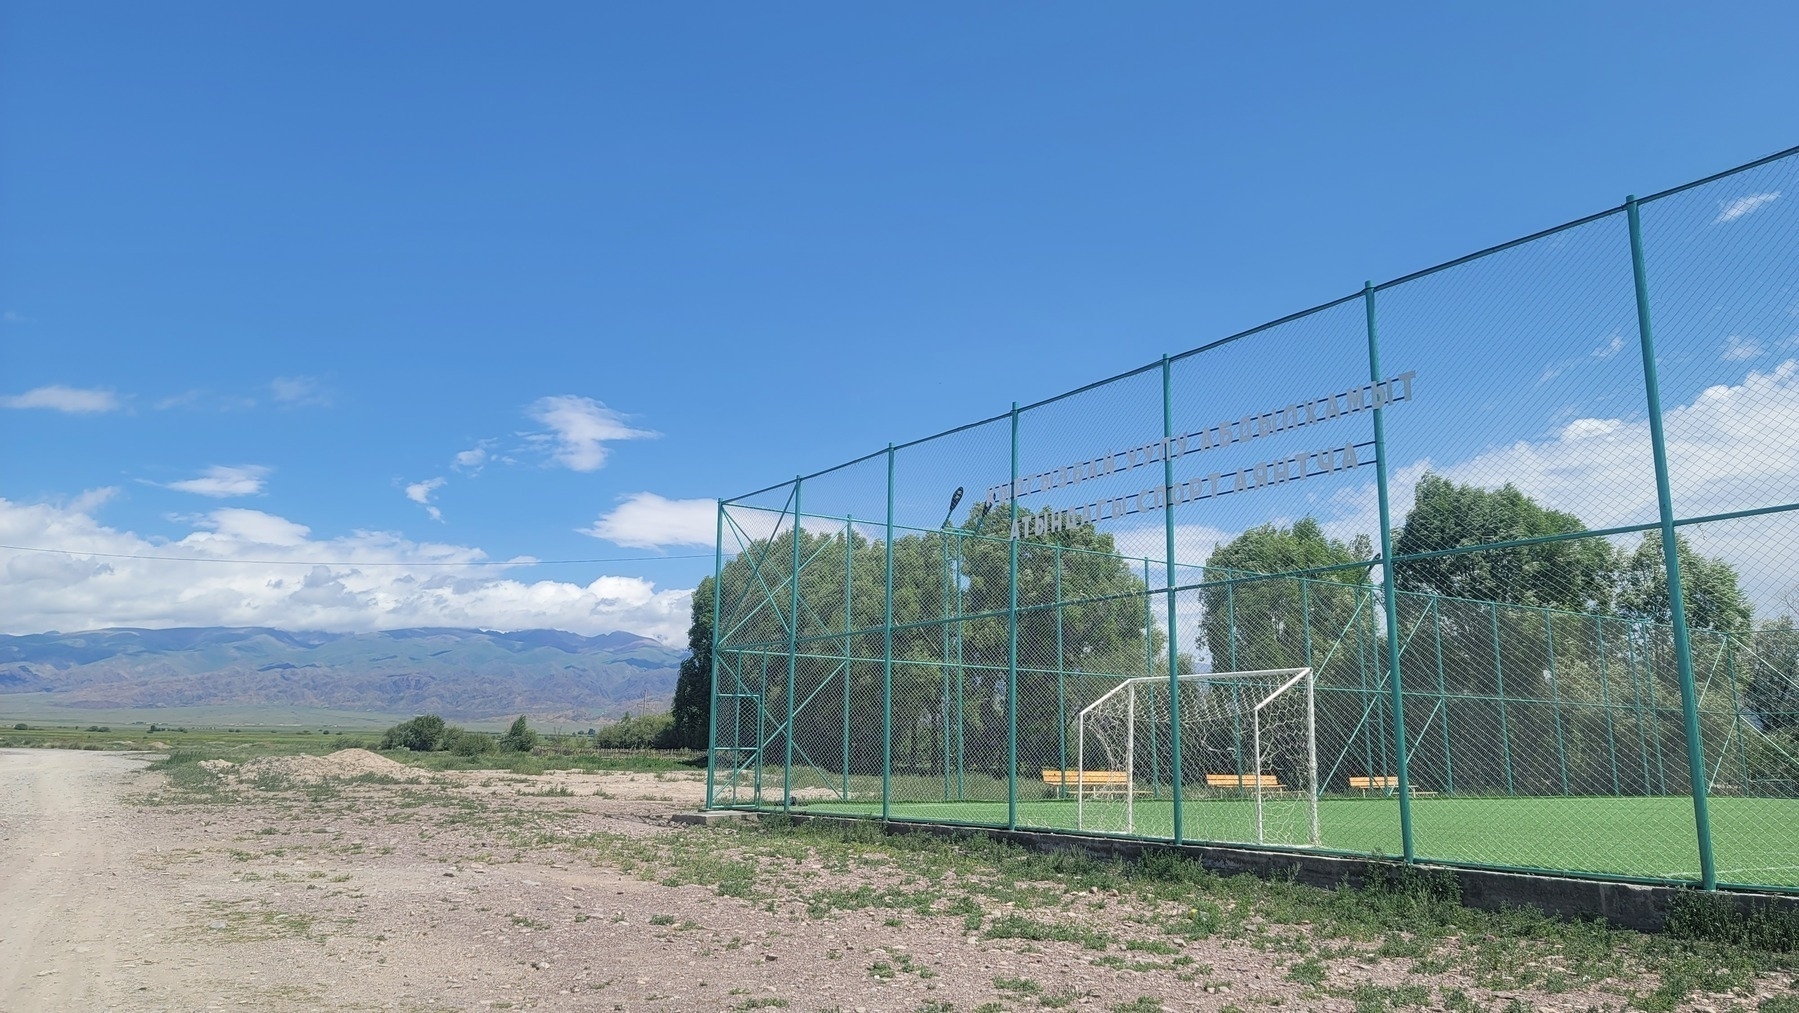 small football (soccer) field with a tall fence all around it, new wooden benches along one side of the field. small mountains visible in the background on the left